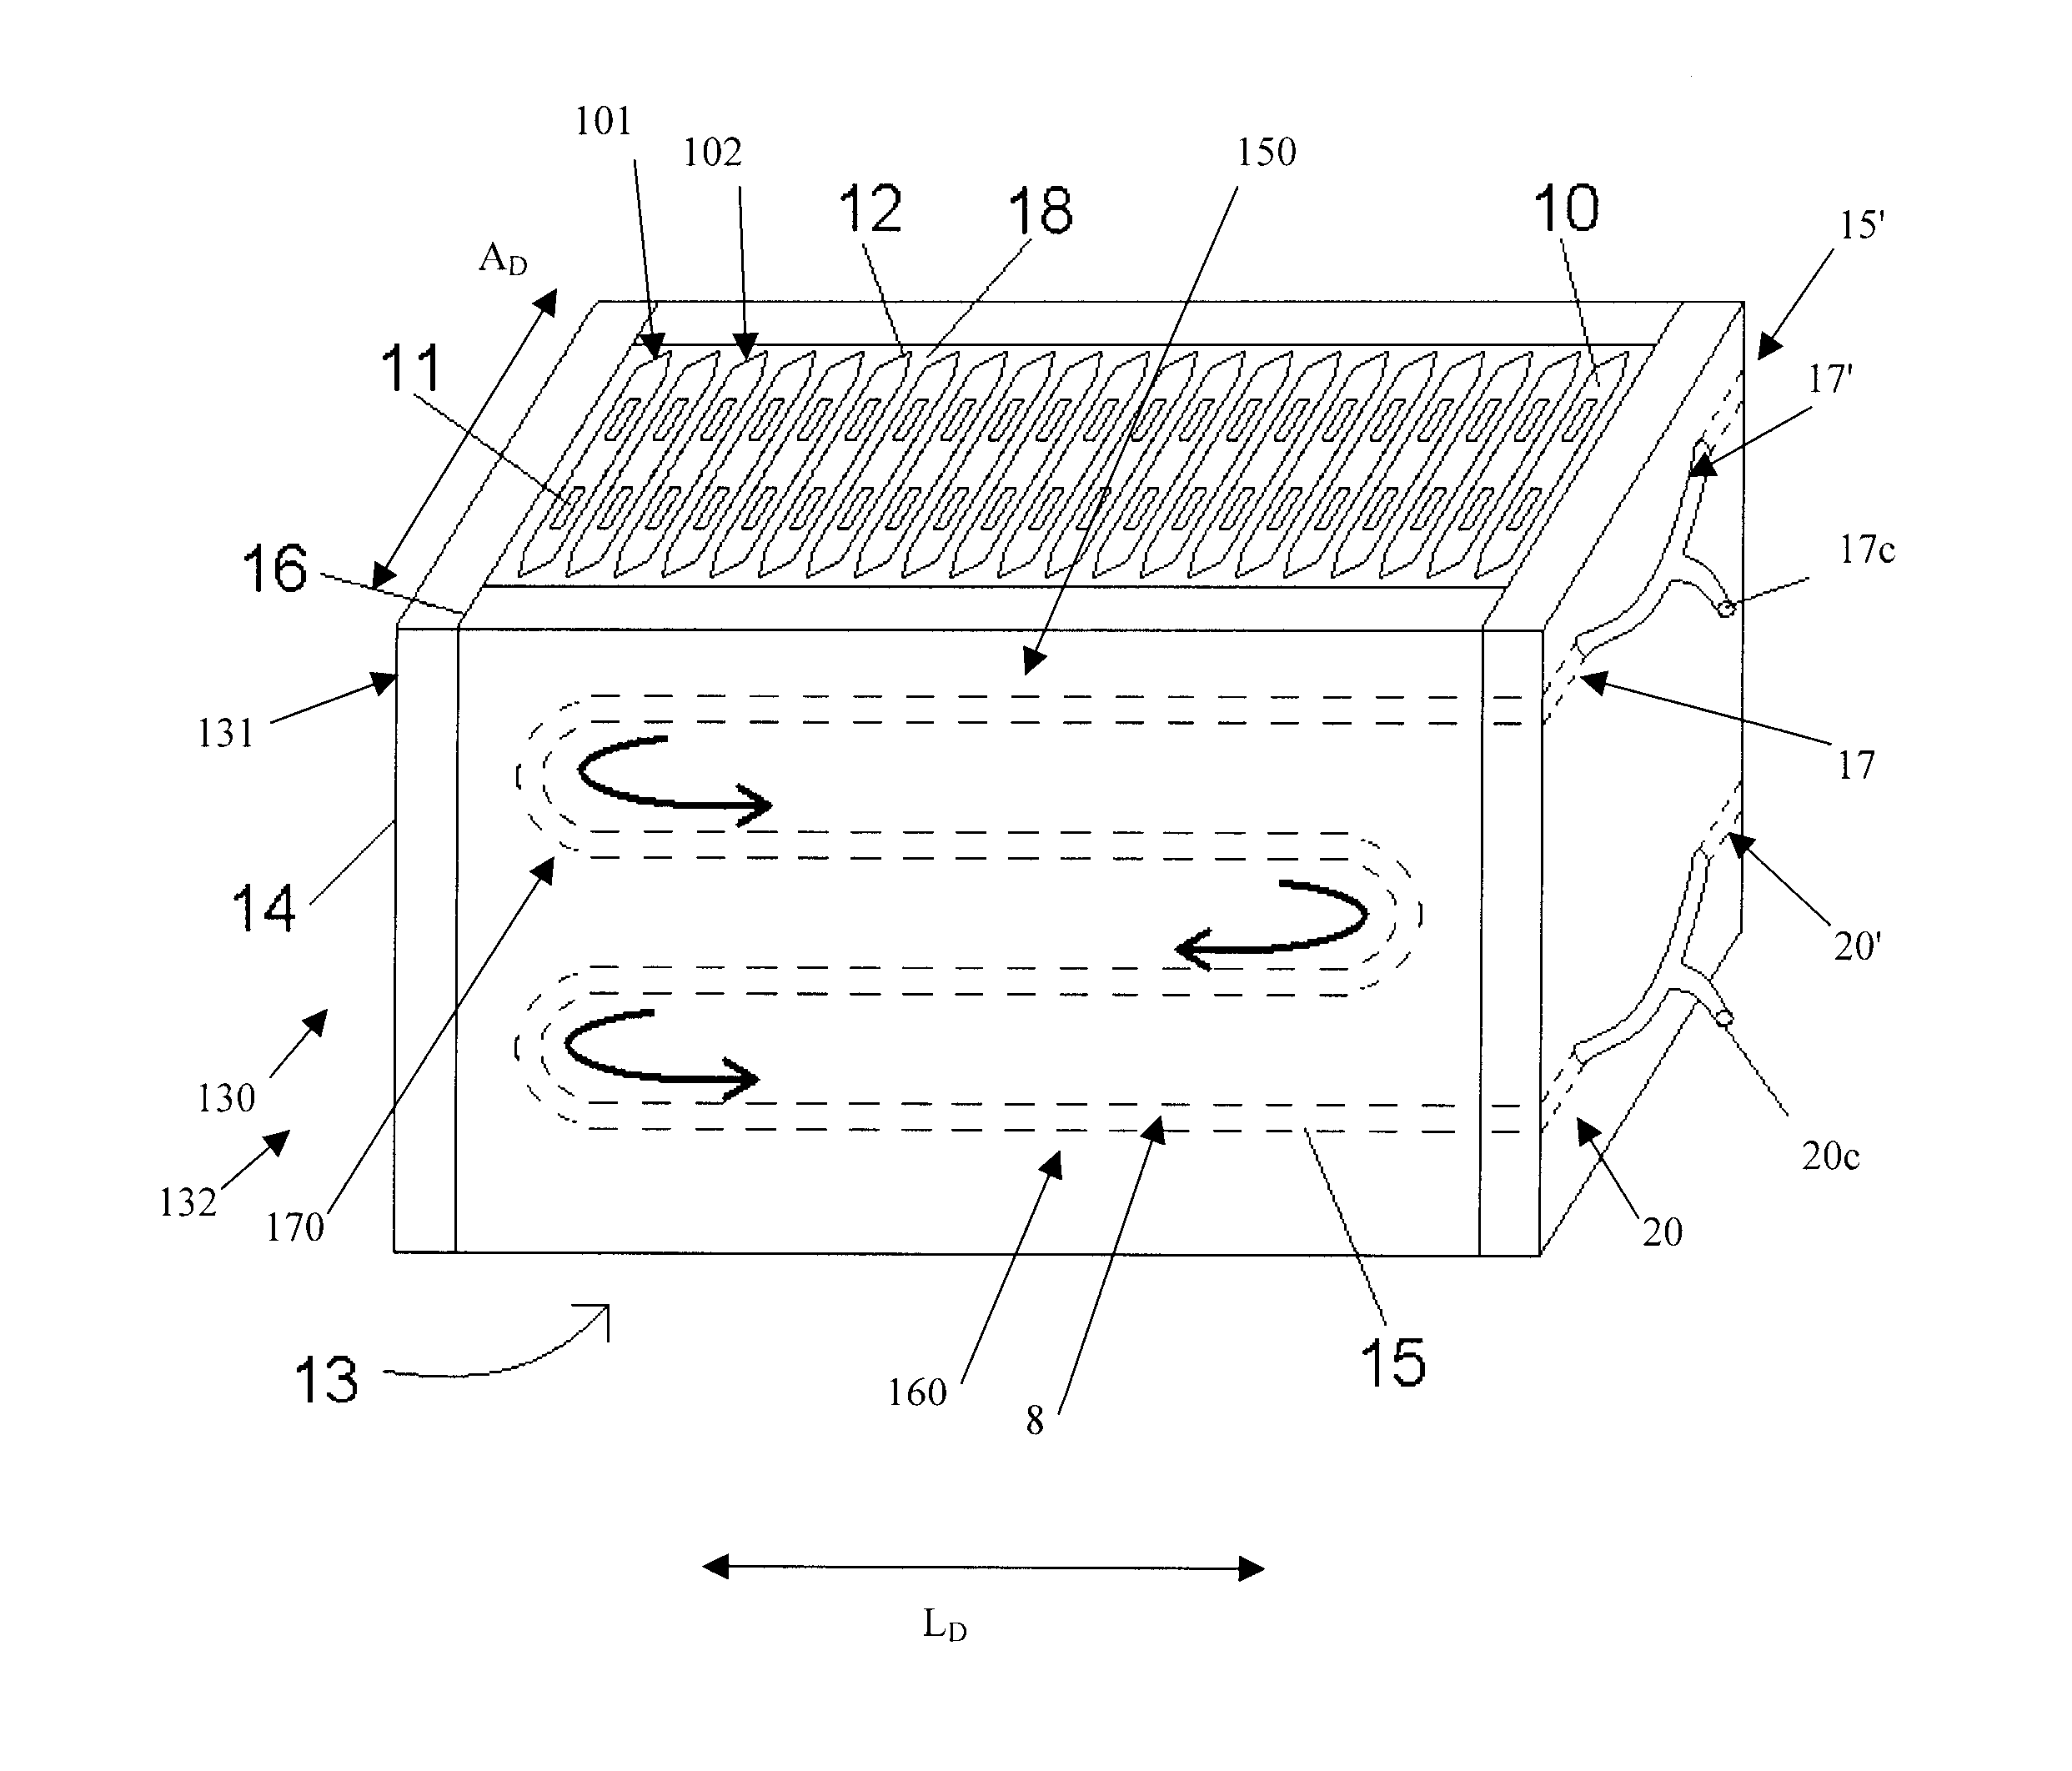 Fluid-cooled battery module containing battery cells